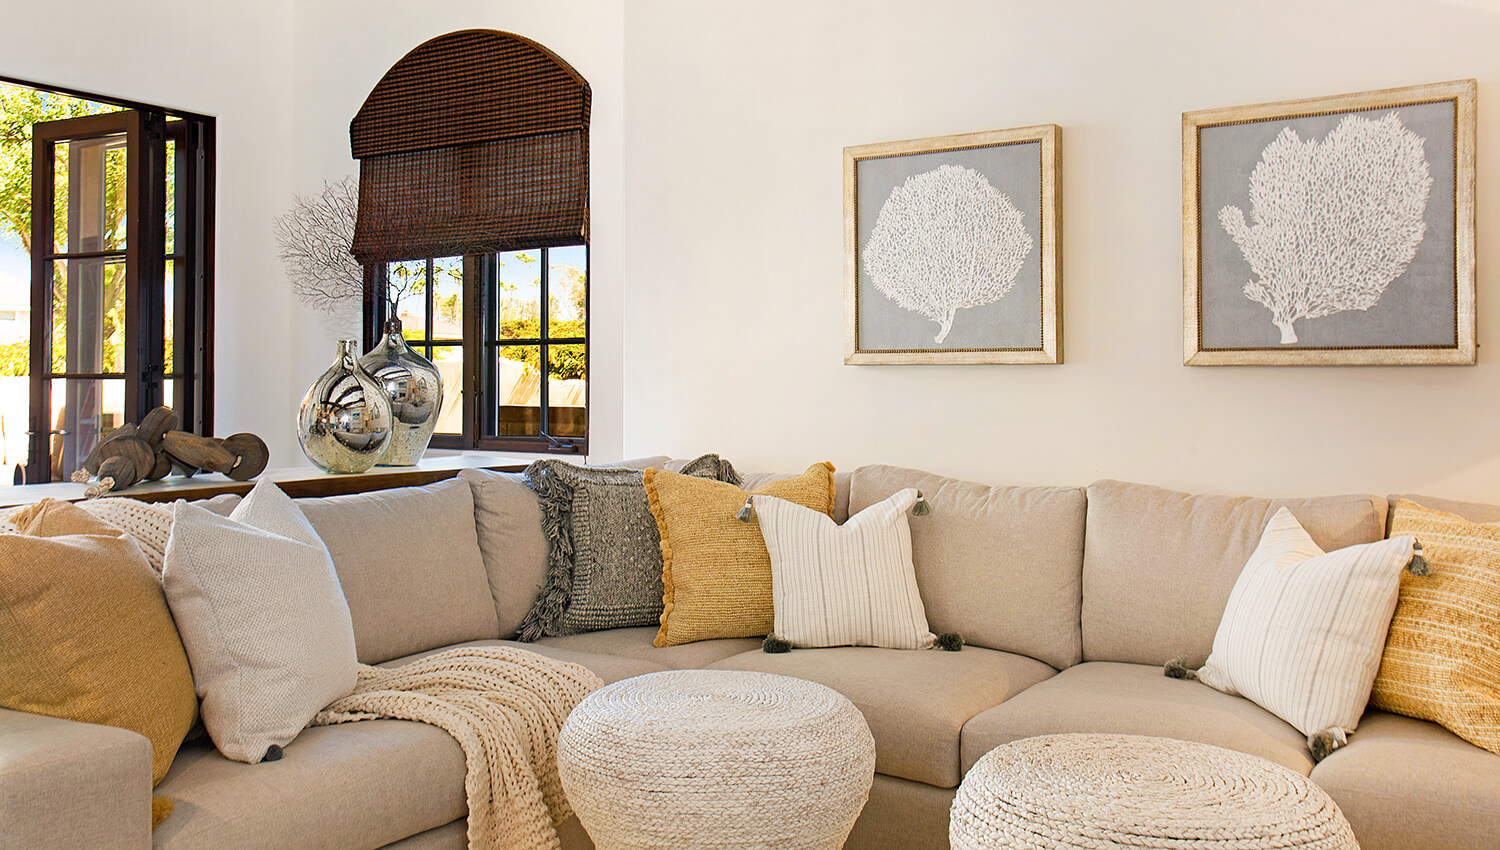 Textiles used in a Coastal style interior design shown with a relaxed living room design.